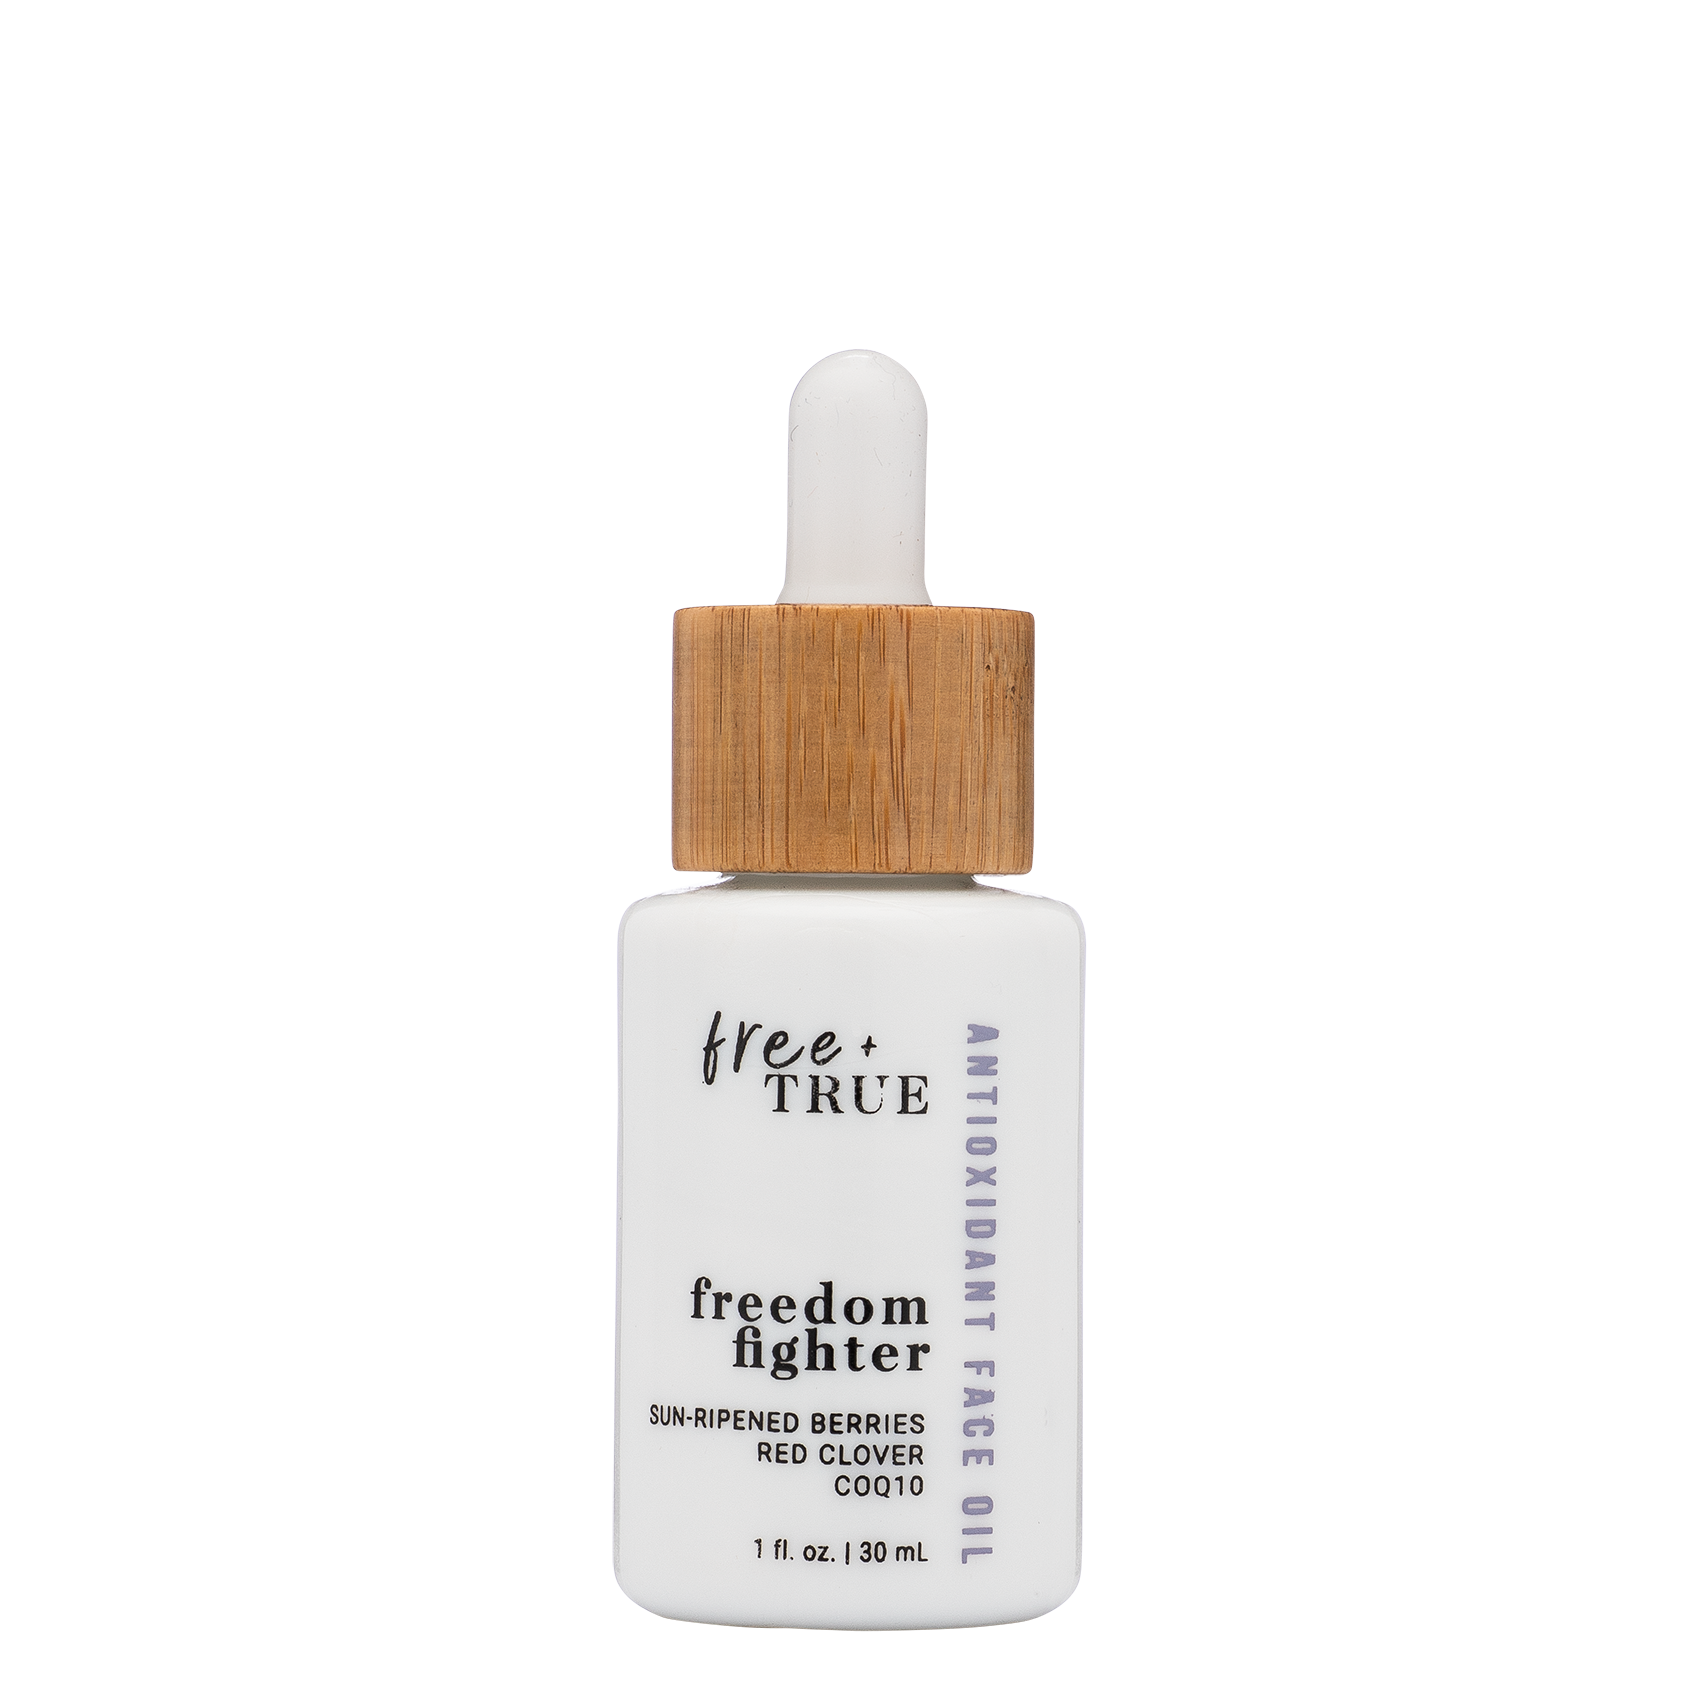 Freedom Fighter - Antioxidant Face Oil